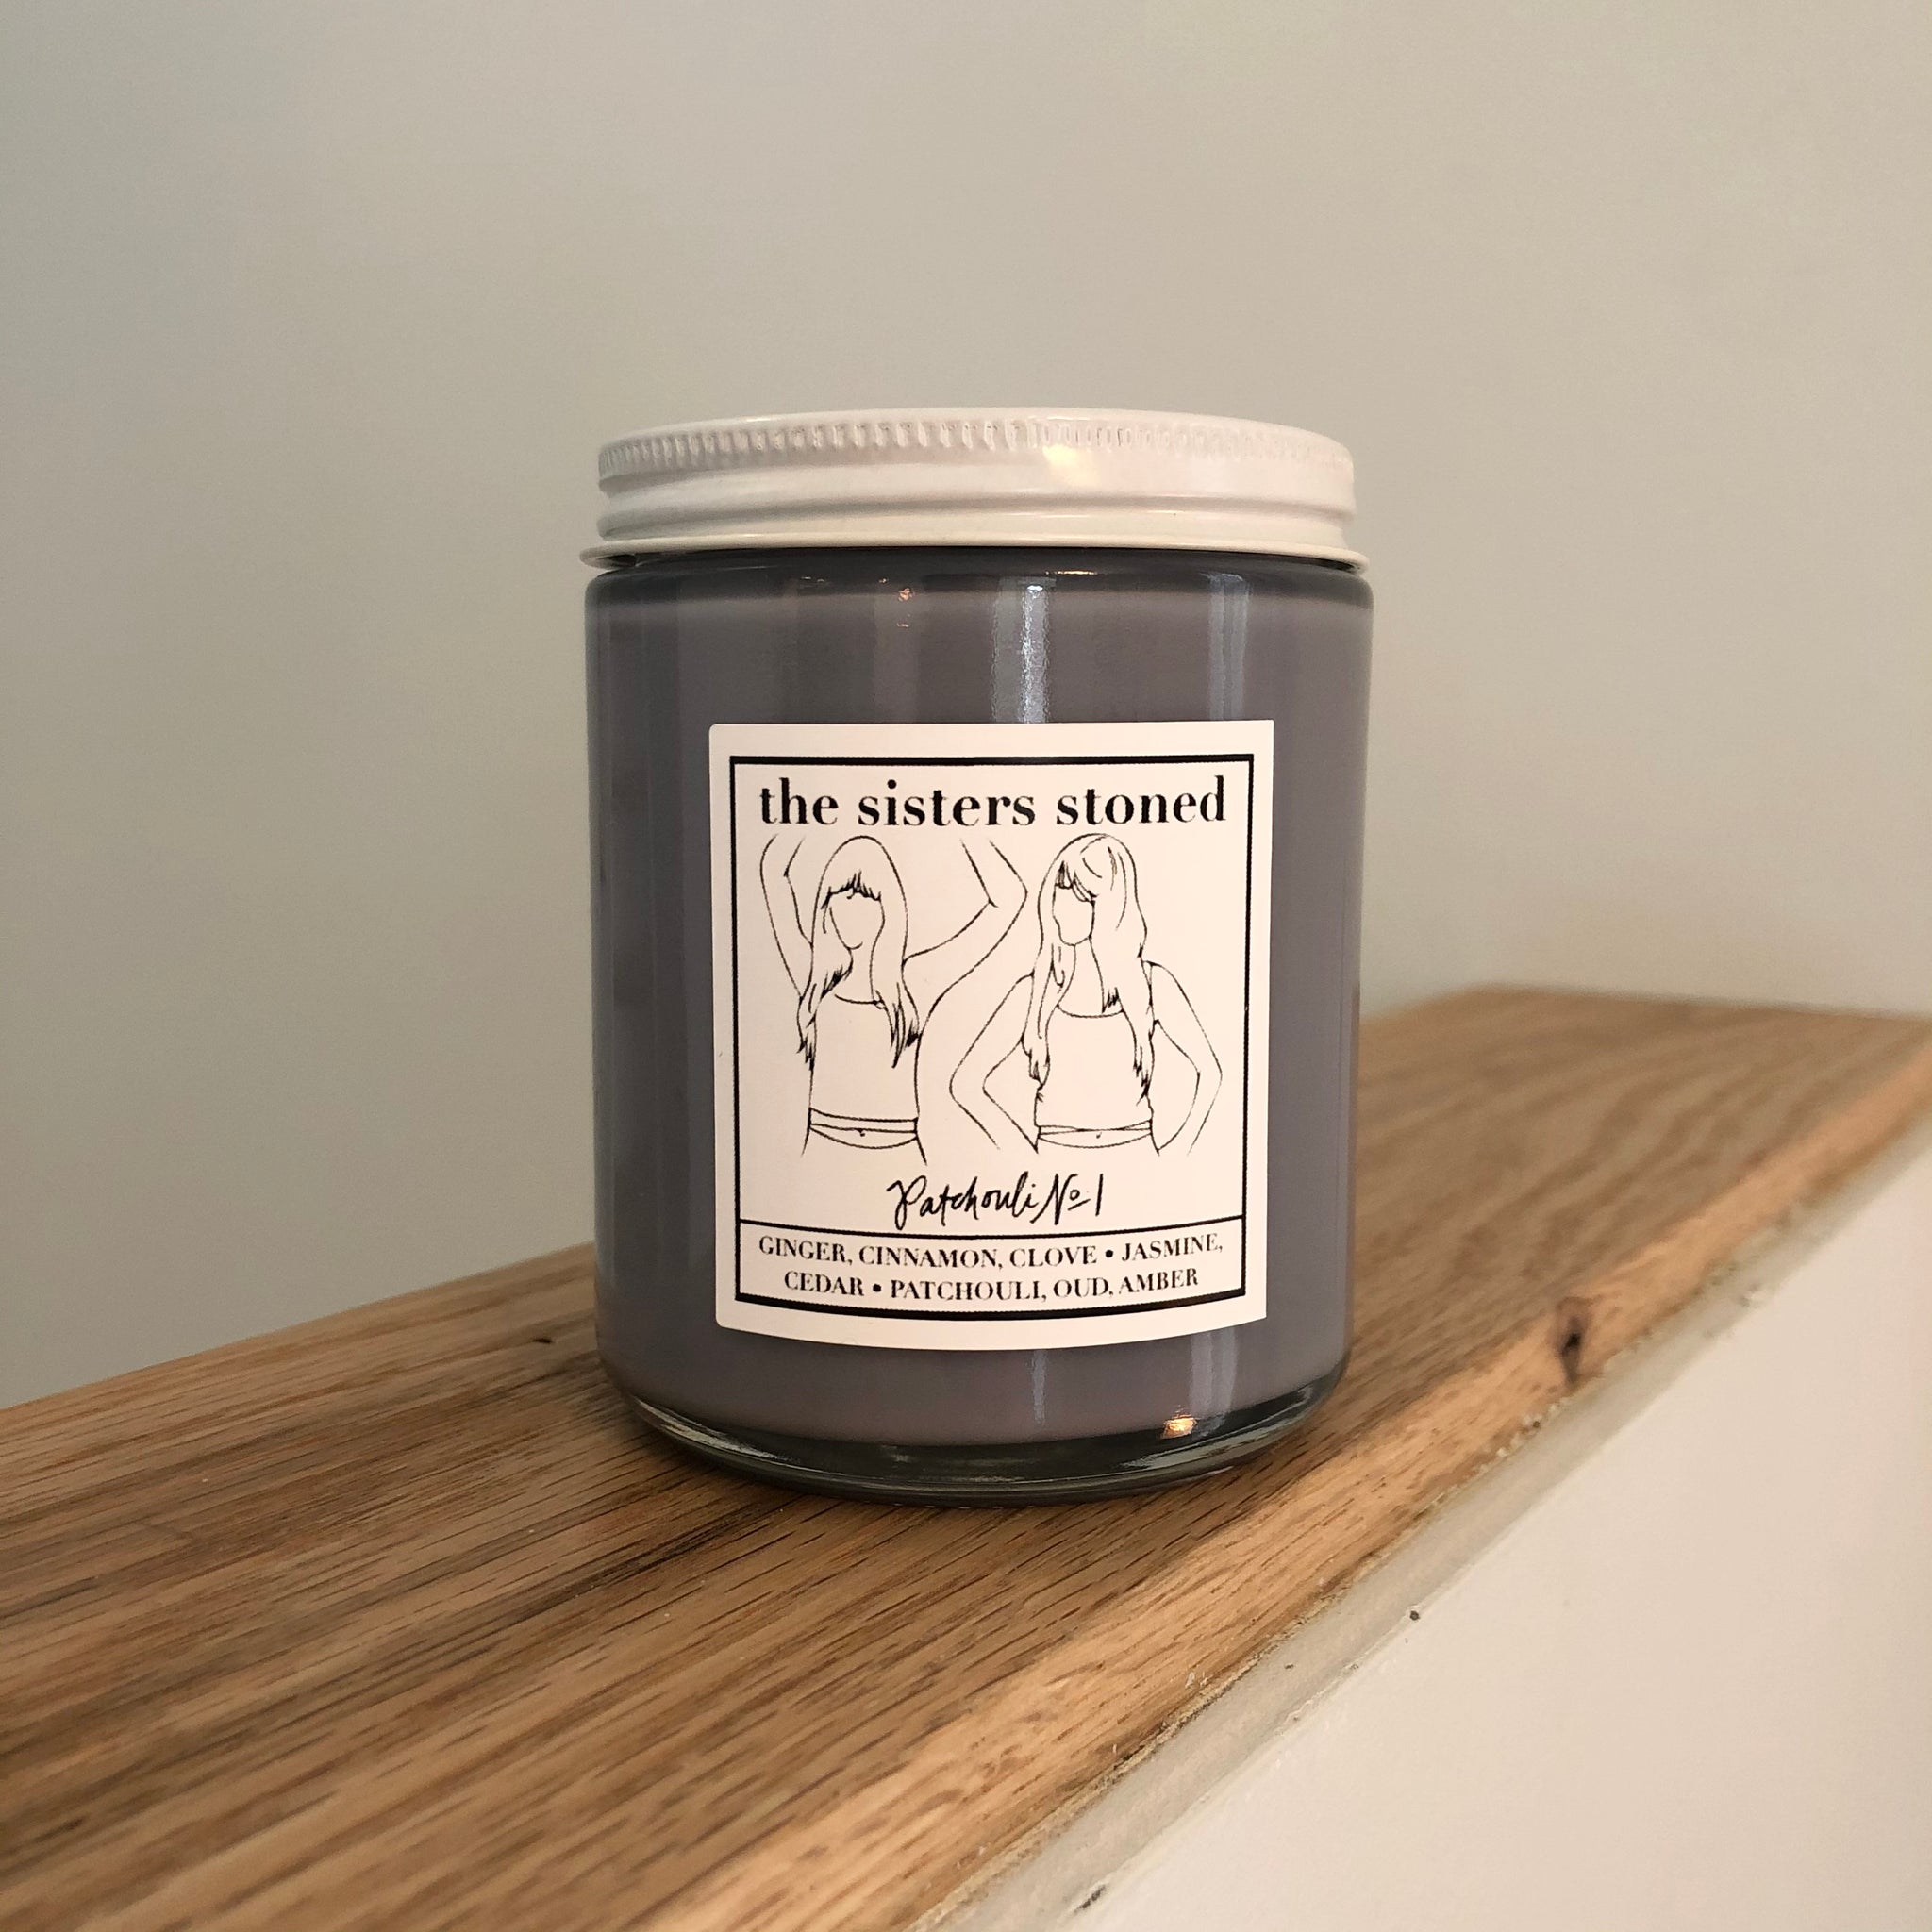 Patchouli No. 1 Aromatherapy Soy Candle